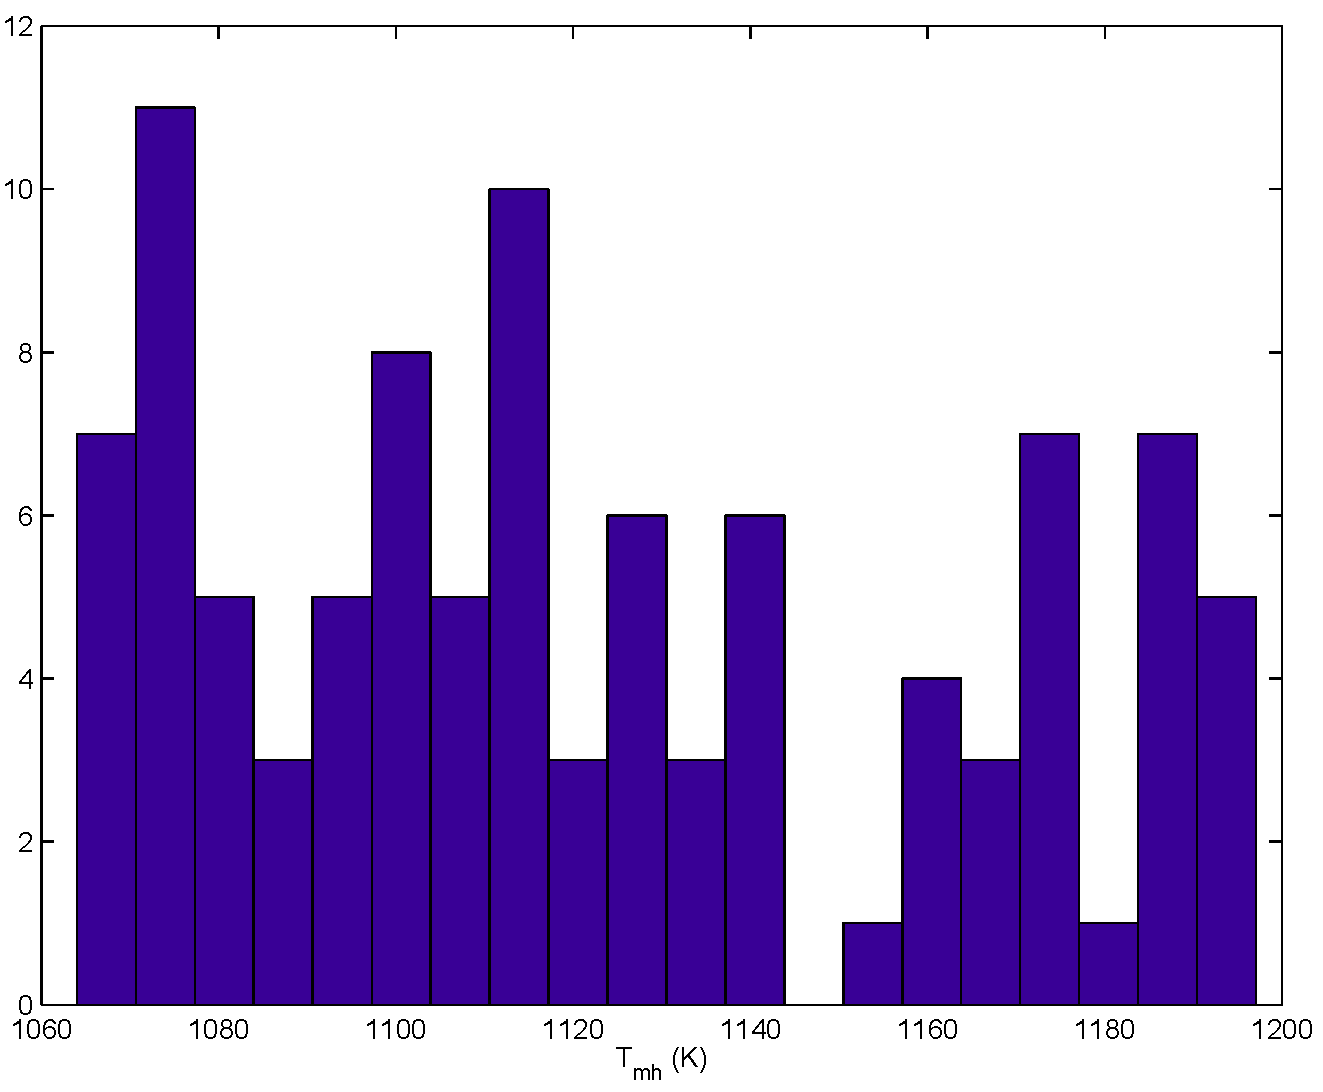 The figure is a histogram of Tmh, given a uniformly distributed LTBC for a sample size of N=100.